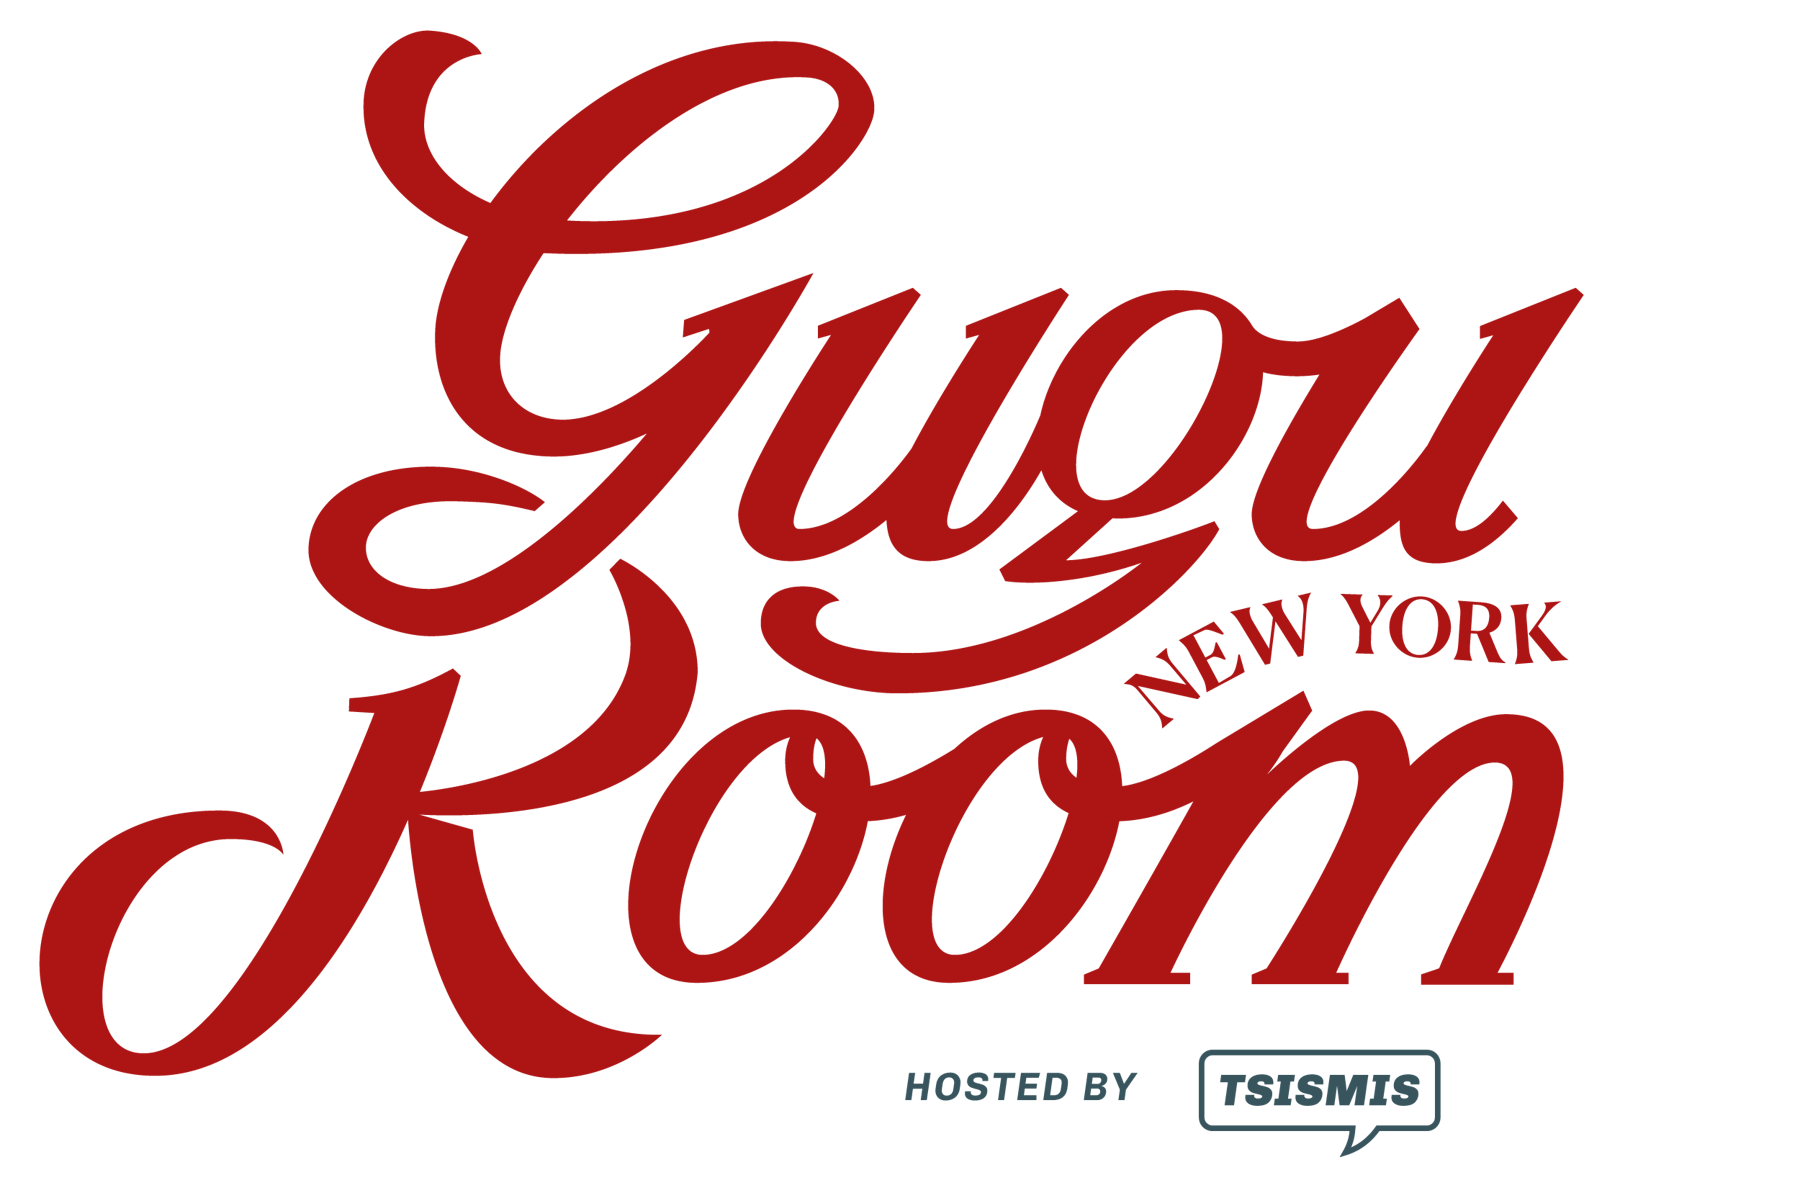 Gugu Room, hosted by TSISMIS